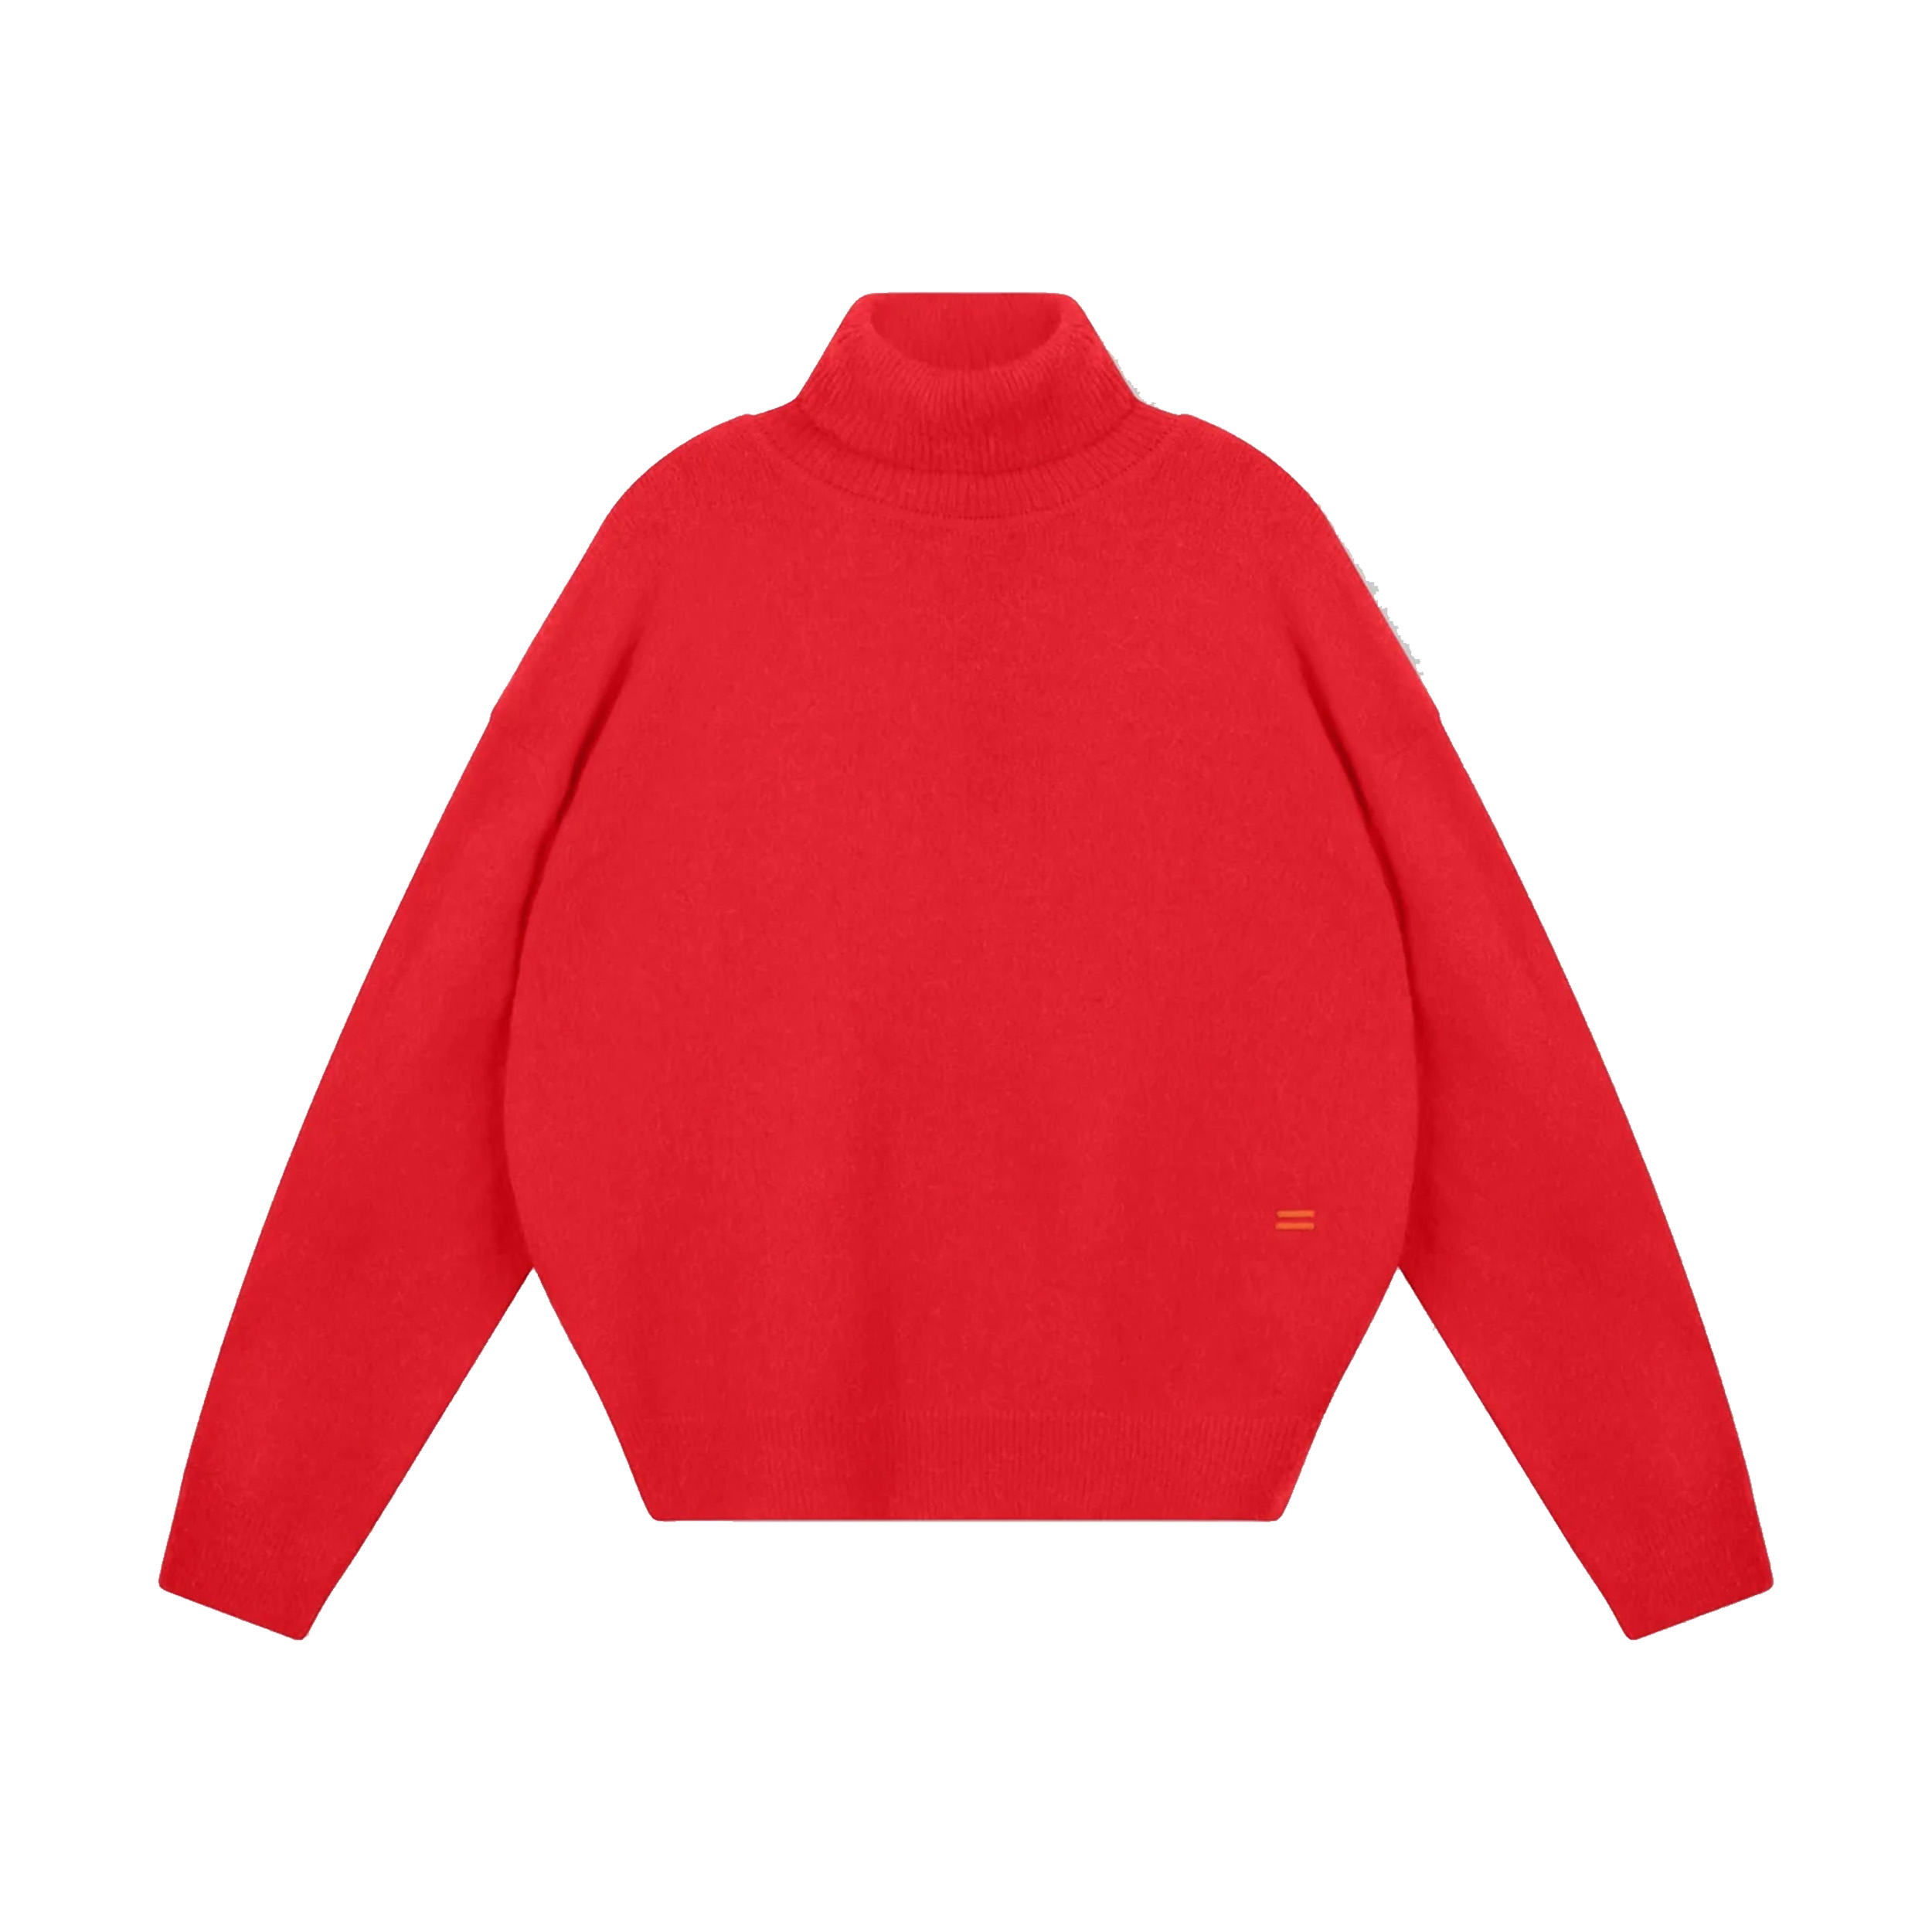 10DAYS Turtleneck Sweater Knit Coral Red